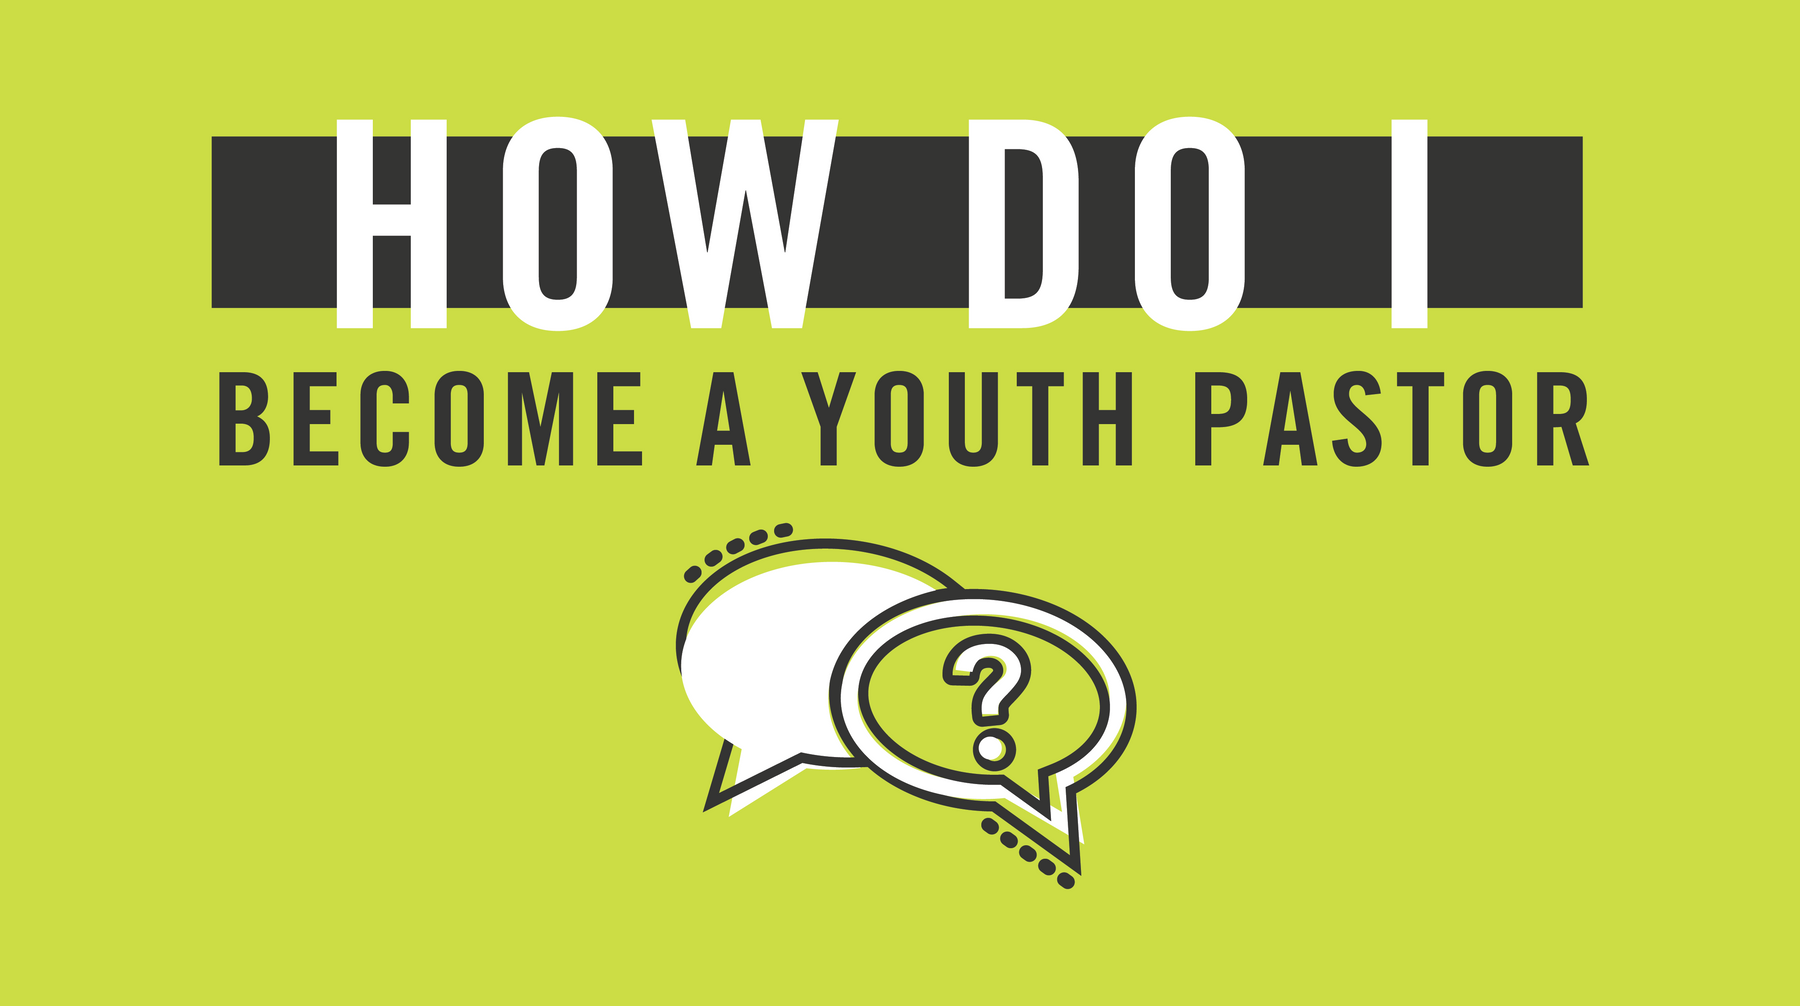 How Do I Become a Youth Pastor?